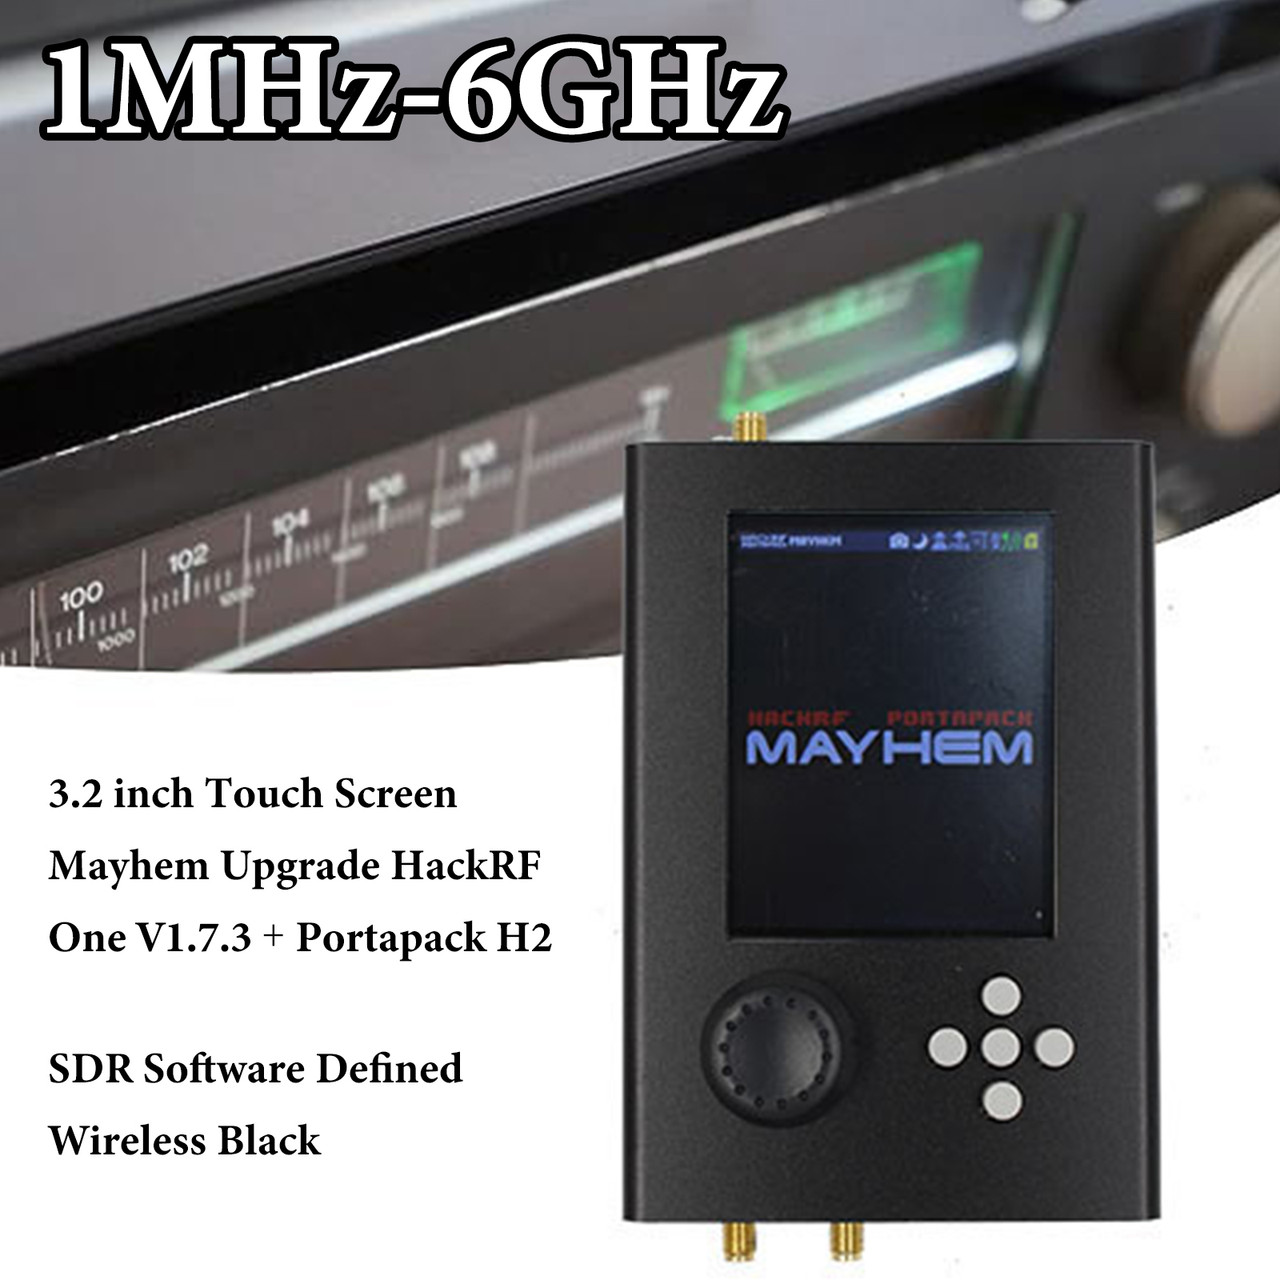 Upgraded HackRF One Portapack H2 1MHz-6GHz SDR Software Defined Wireless Black